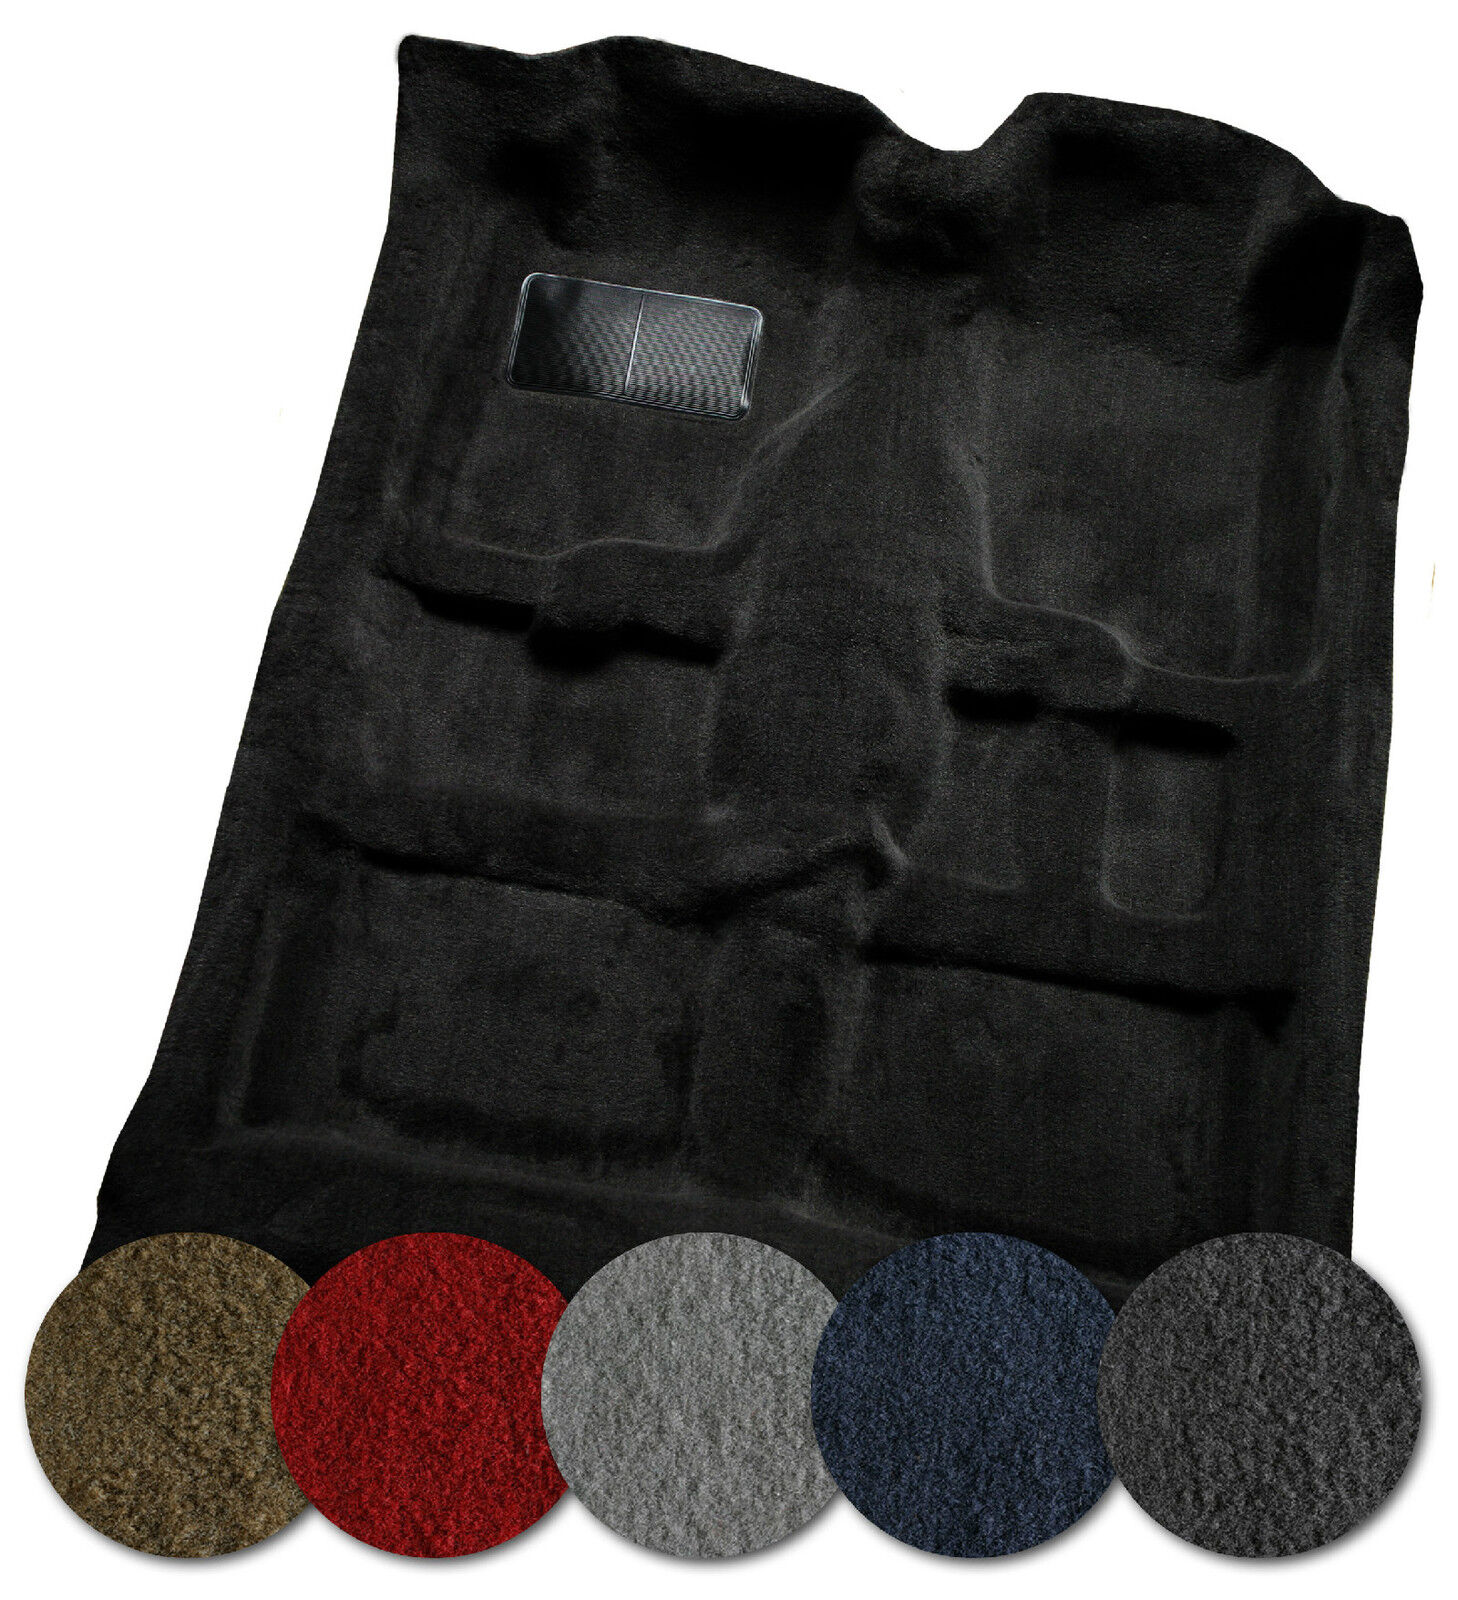 1971-1974 PLYMOUTH SATELLITE 2DR AUTO CARPET - ANY COLOR